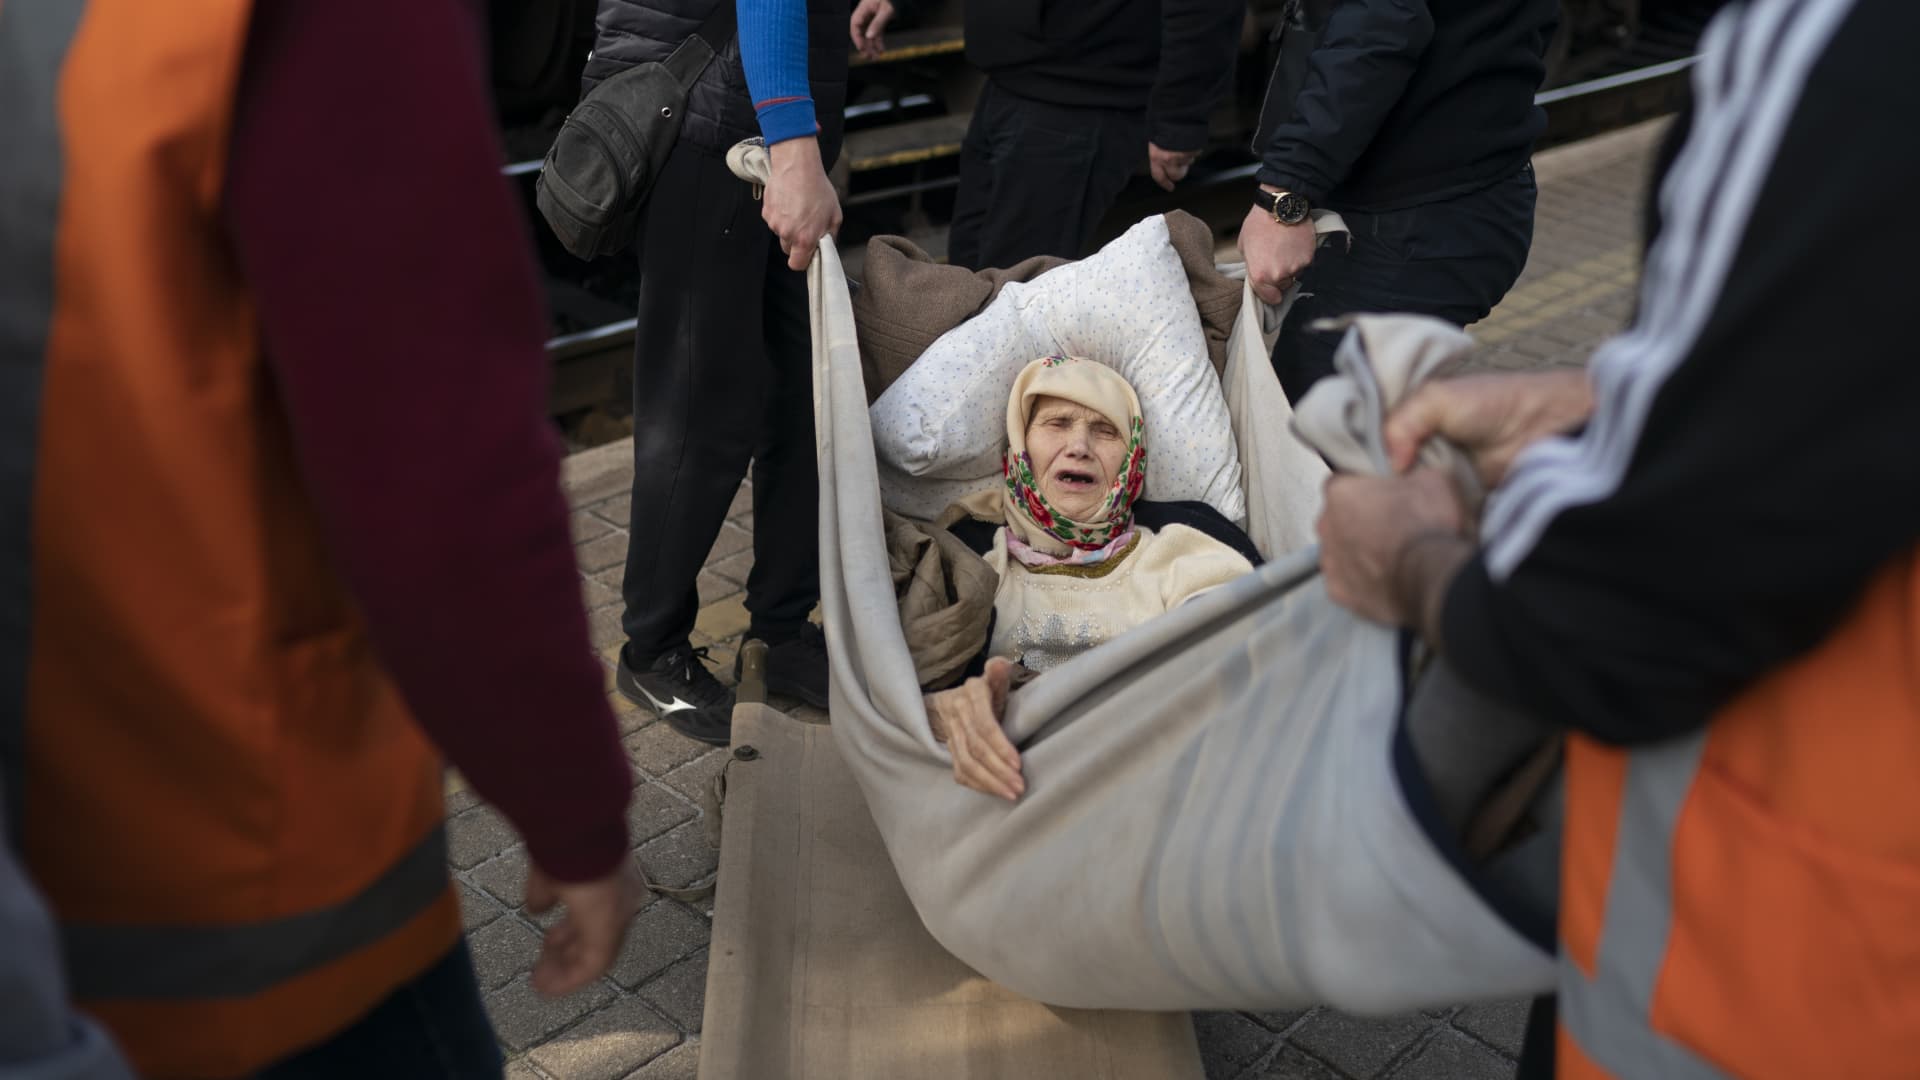 Klavidia, 91, is carried on an improvised stretcher as she boards a train, fleeing the war in Severodonetsk at a train station in Pokrovsk, Ukraine, Monday, April 25, 2022.